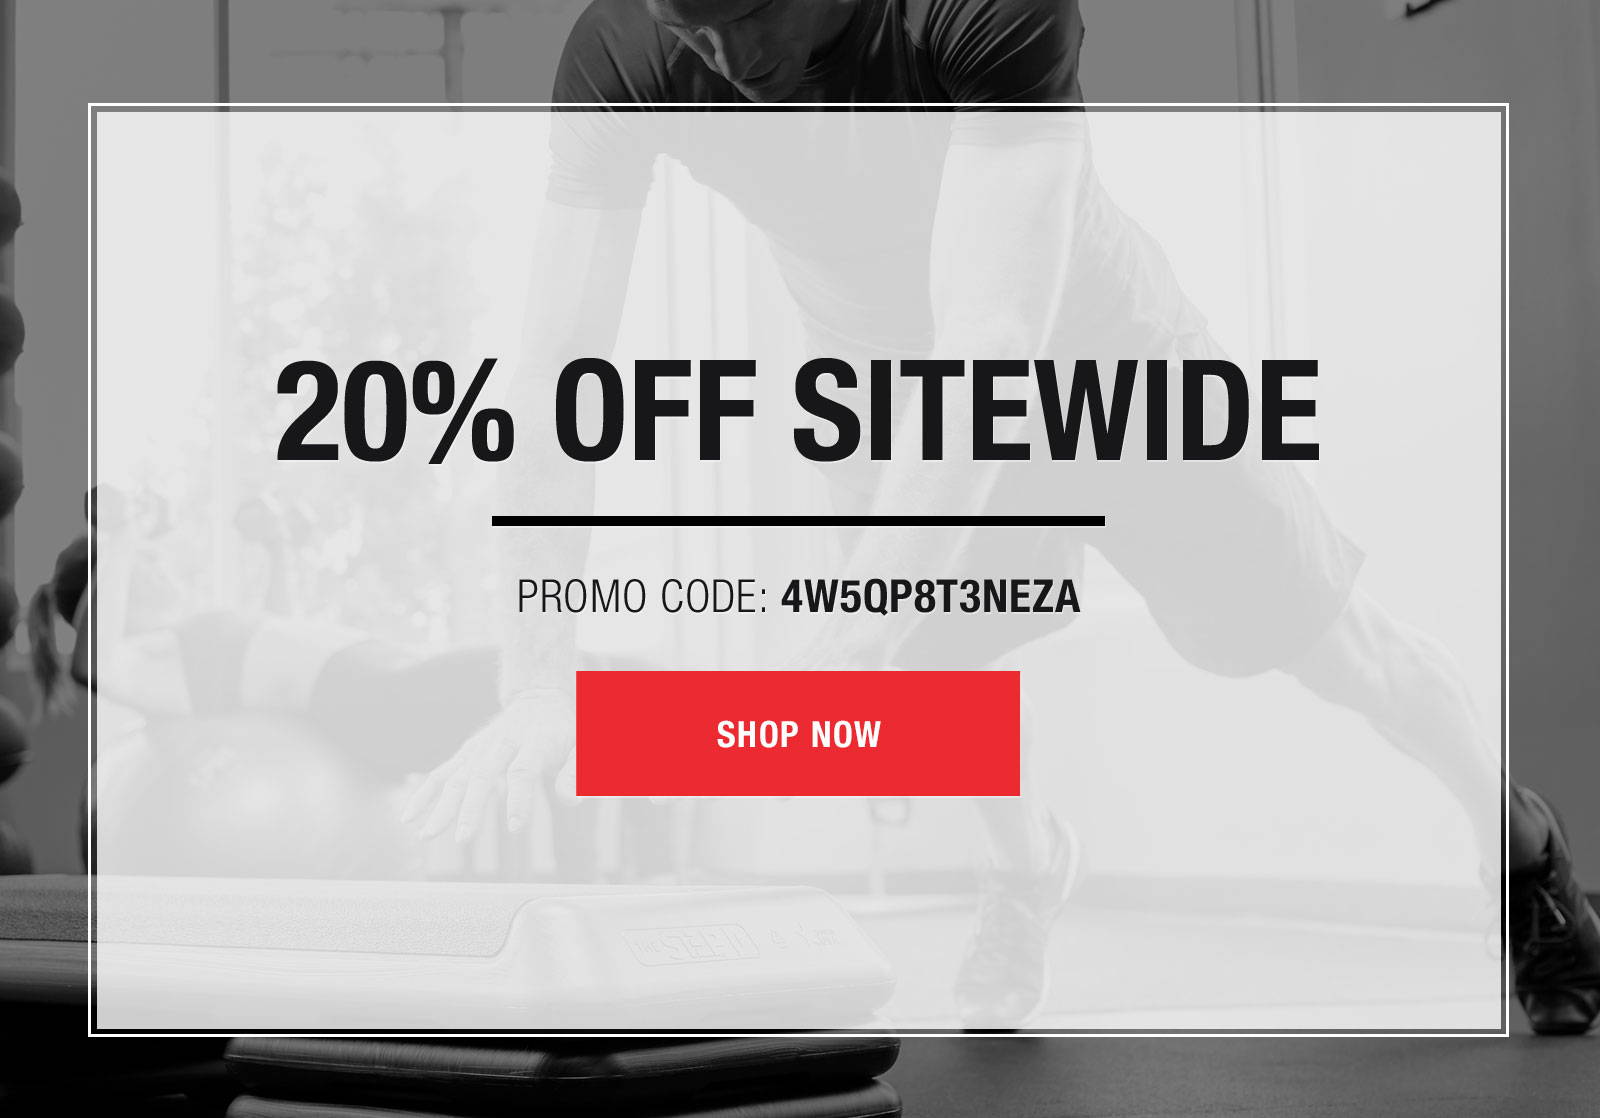 20% off sitewide with code 4W5QP8T3NEZA